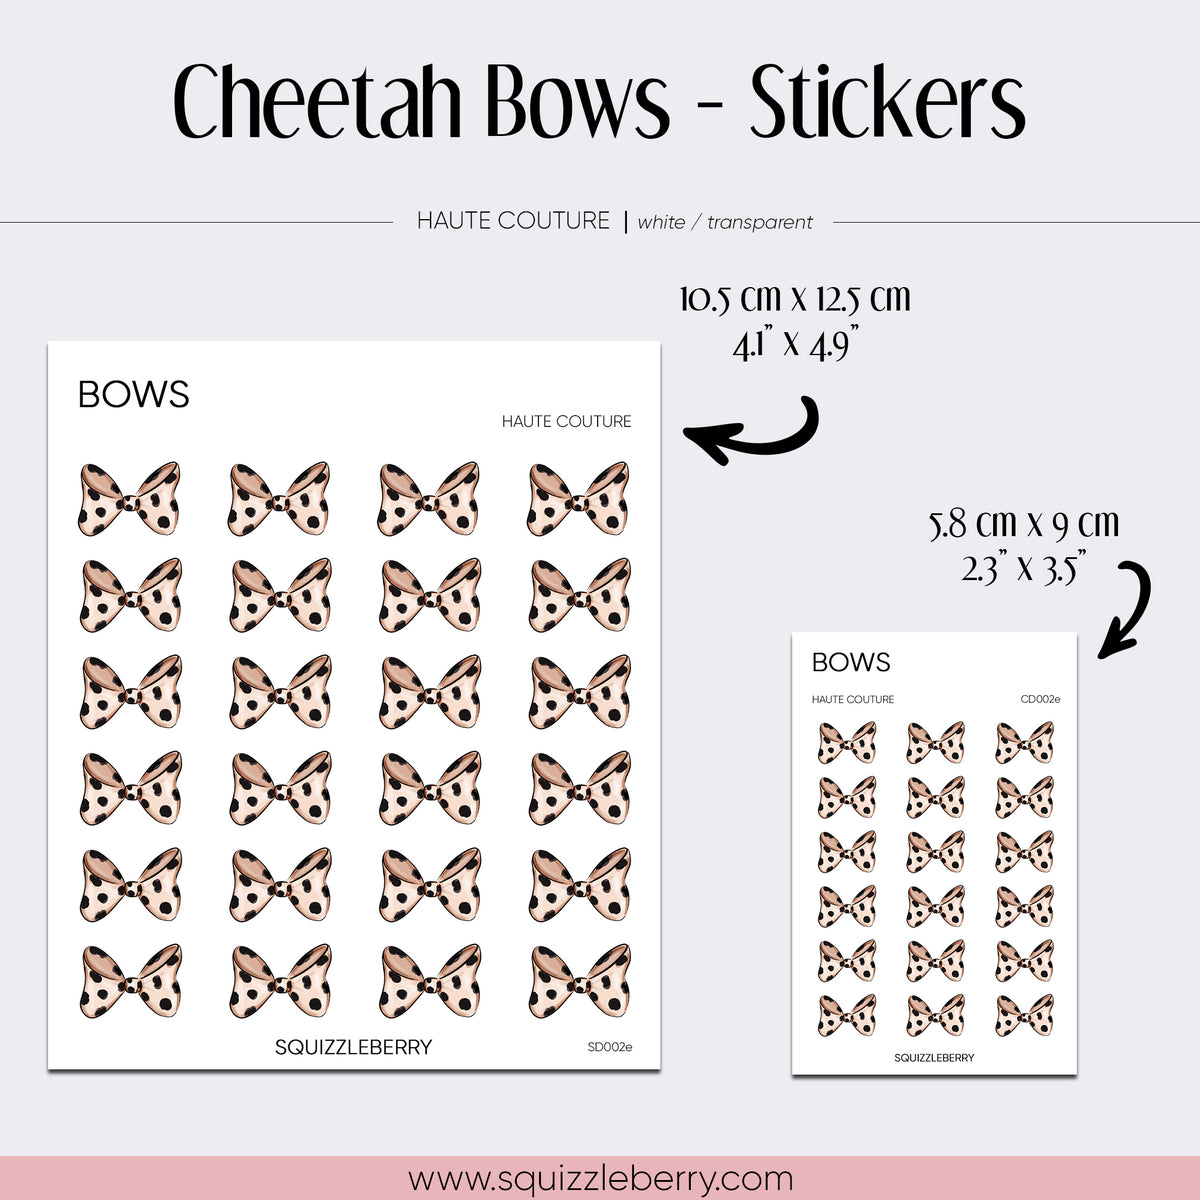 Cheetah Bows - Stickers | SquizzleBerry